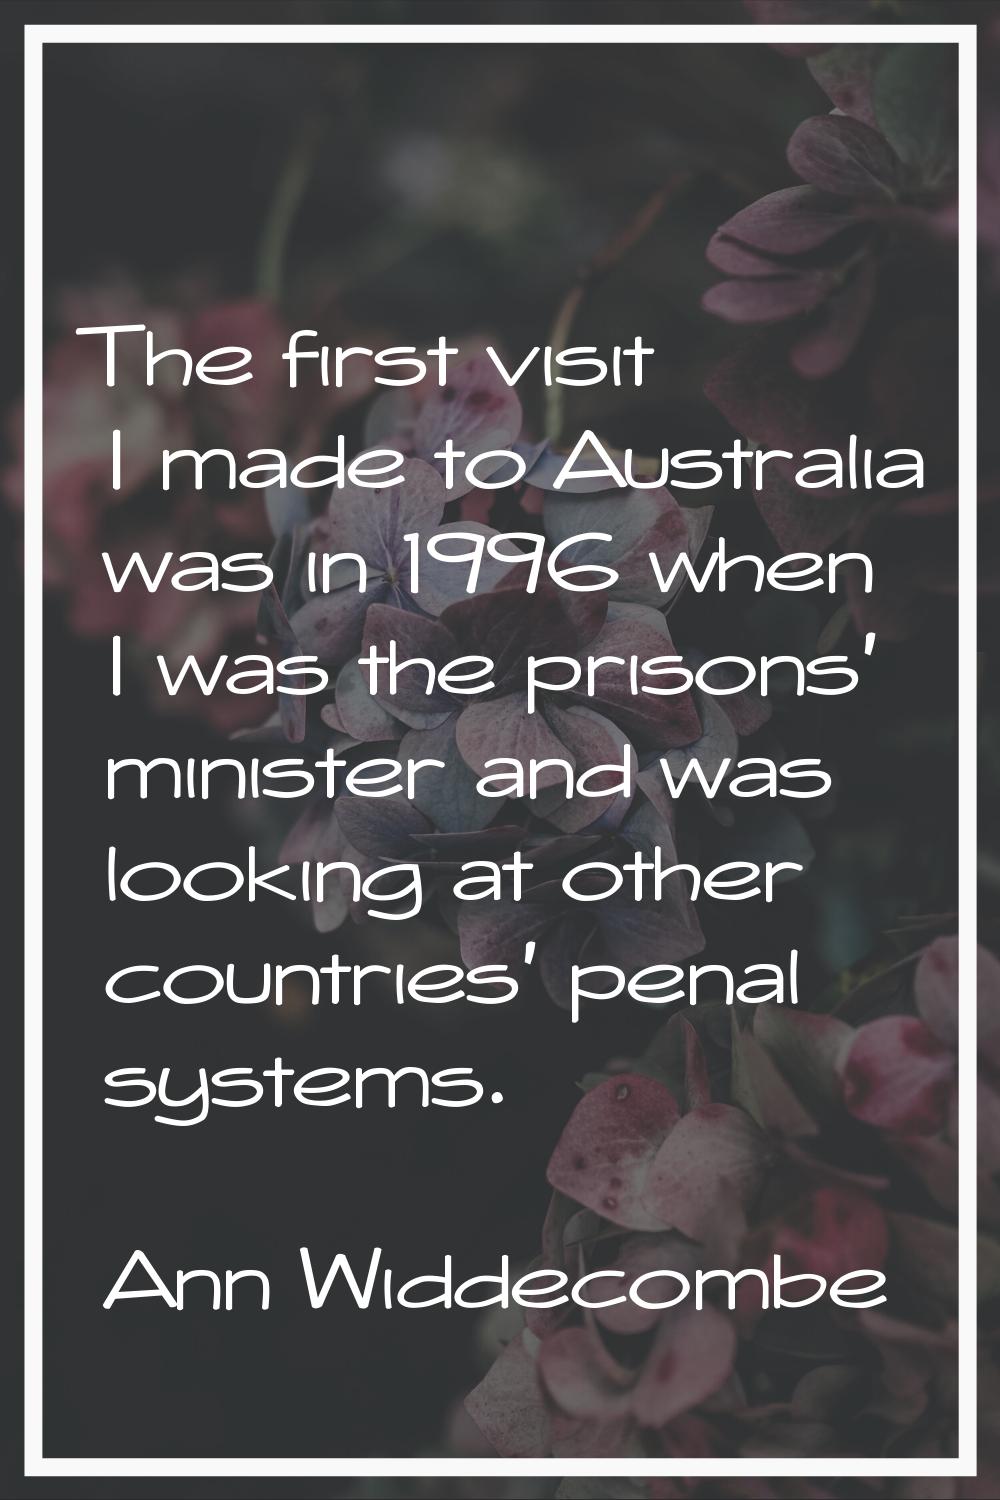 The first visit I made to Australia was in 1996 when I was the prisons' minister and was looking at